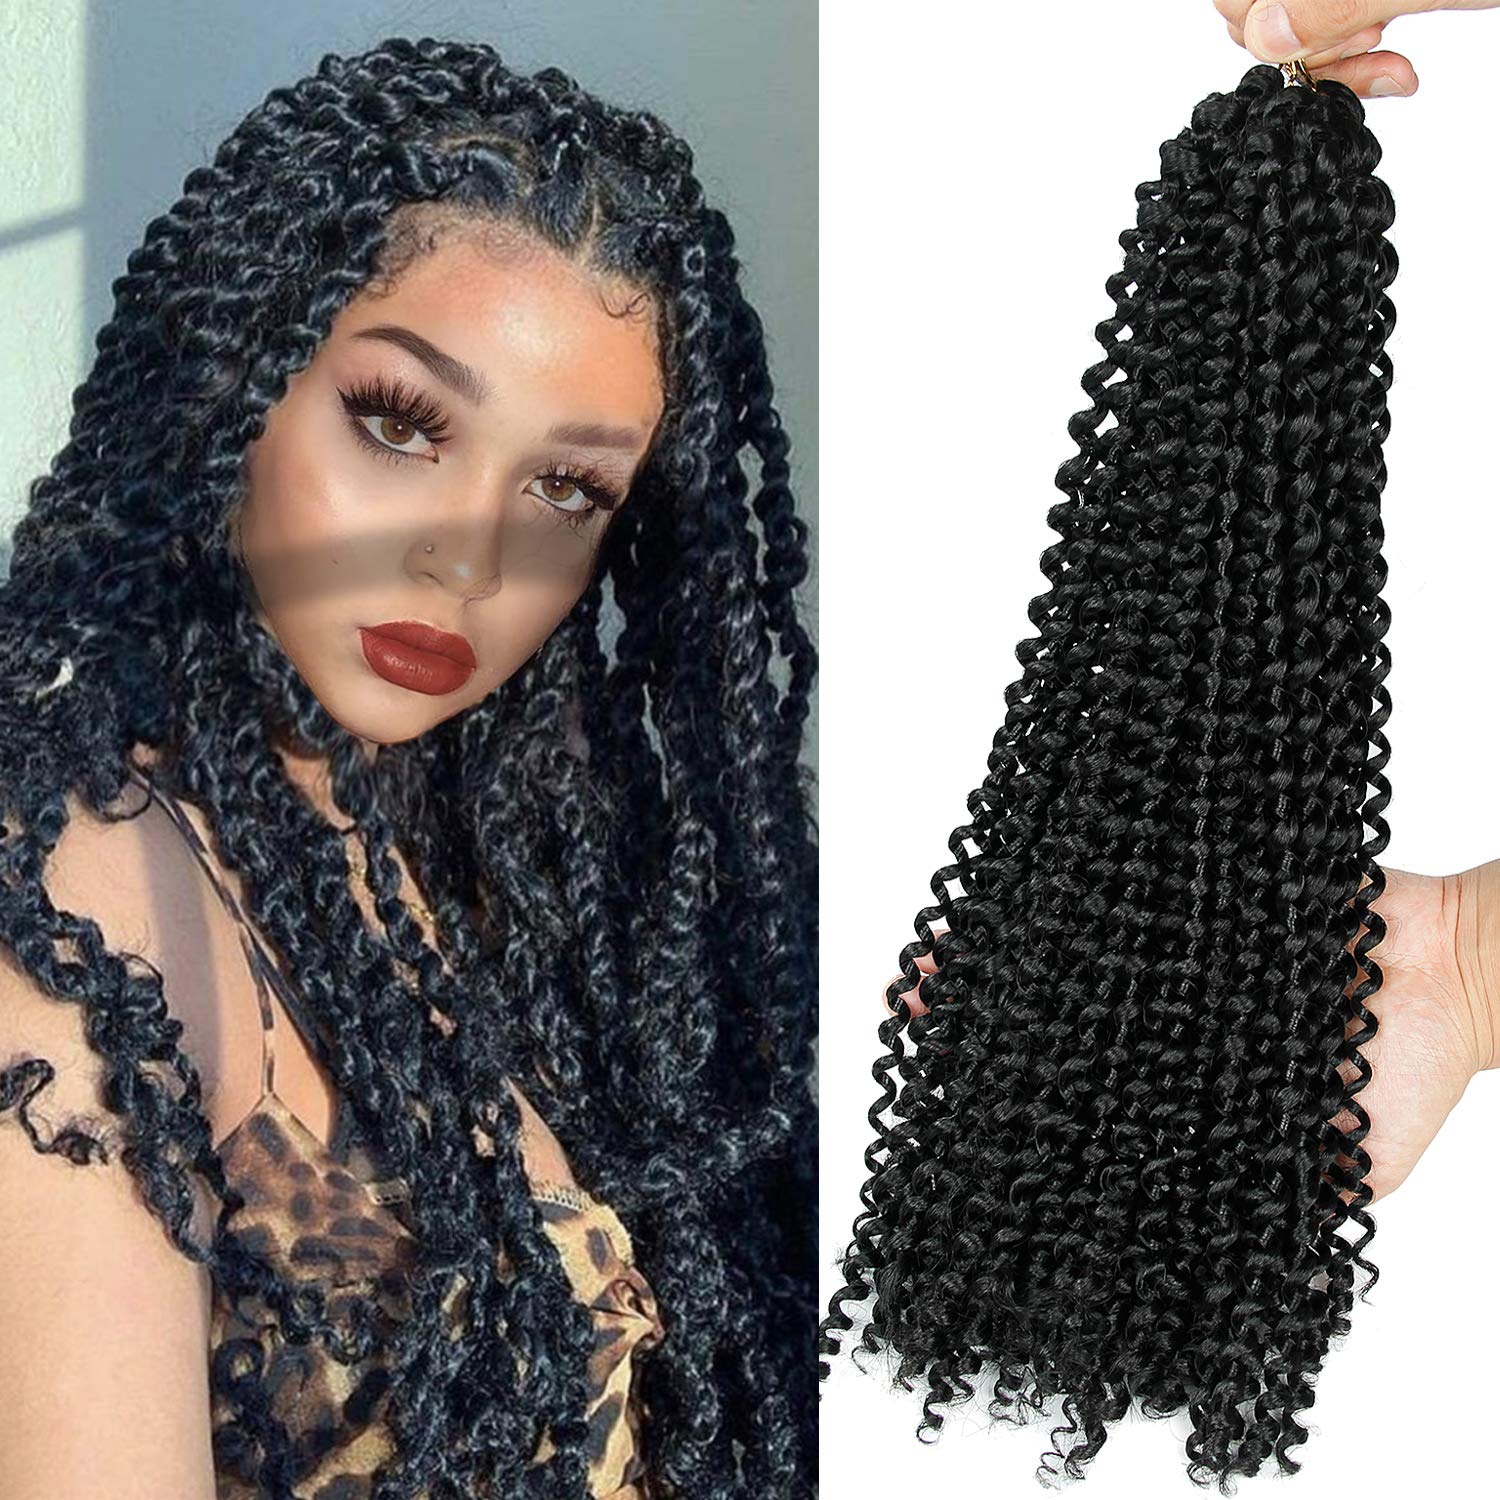 22 inches Water Wave for Passion Twist Hair Synthetisch 22 